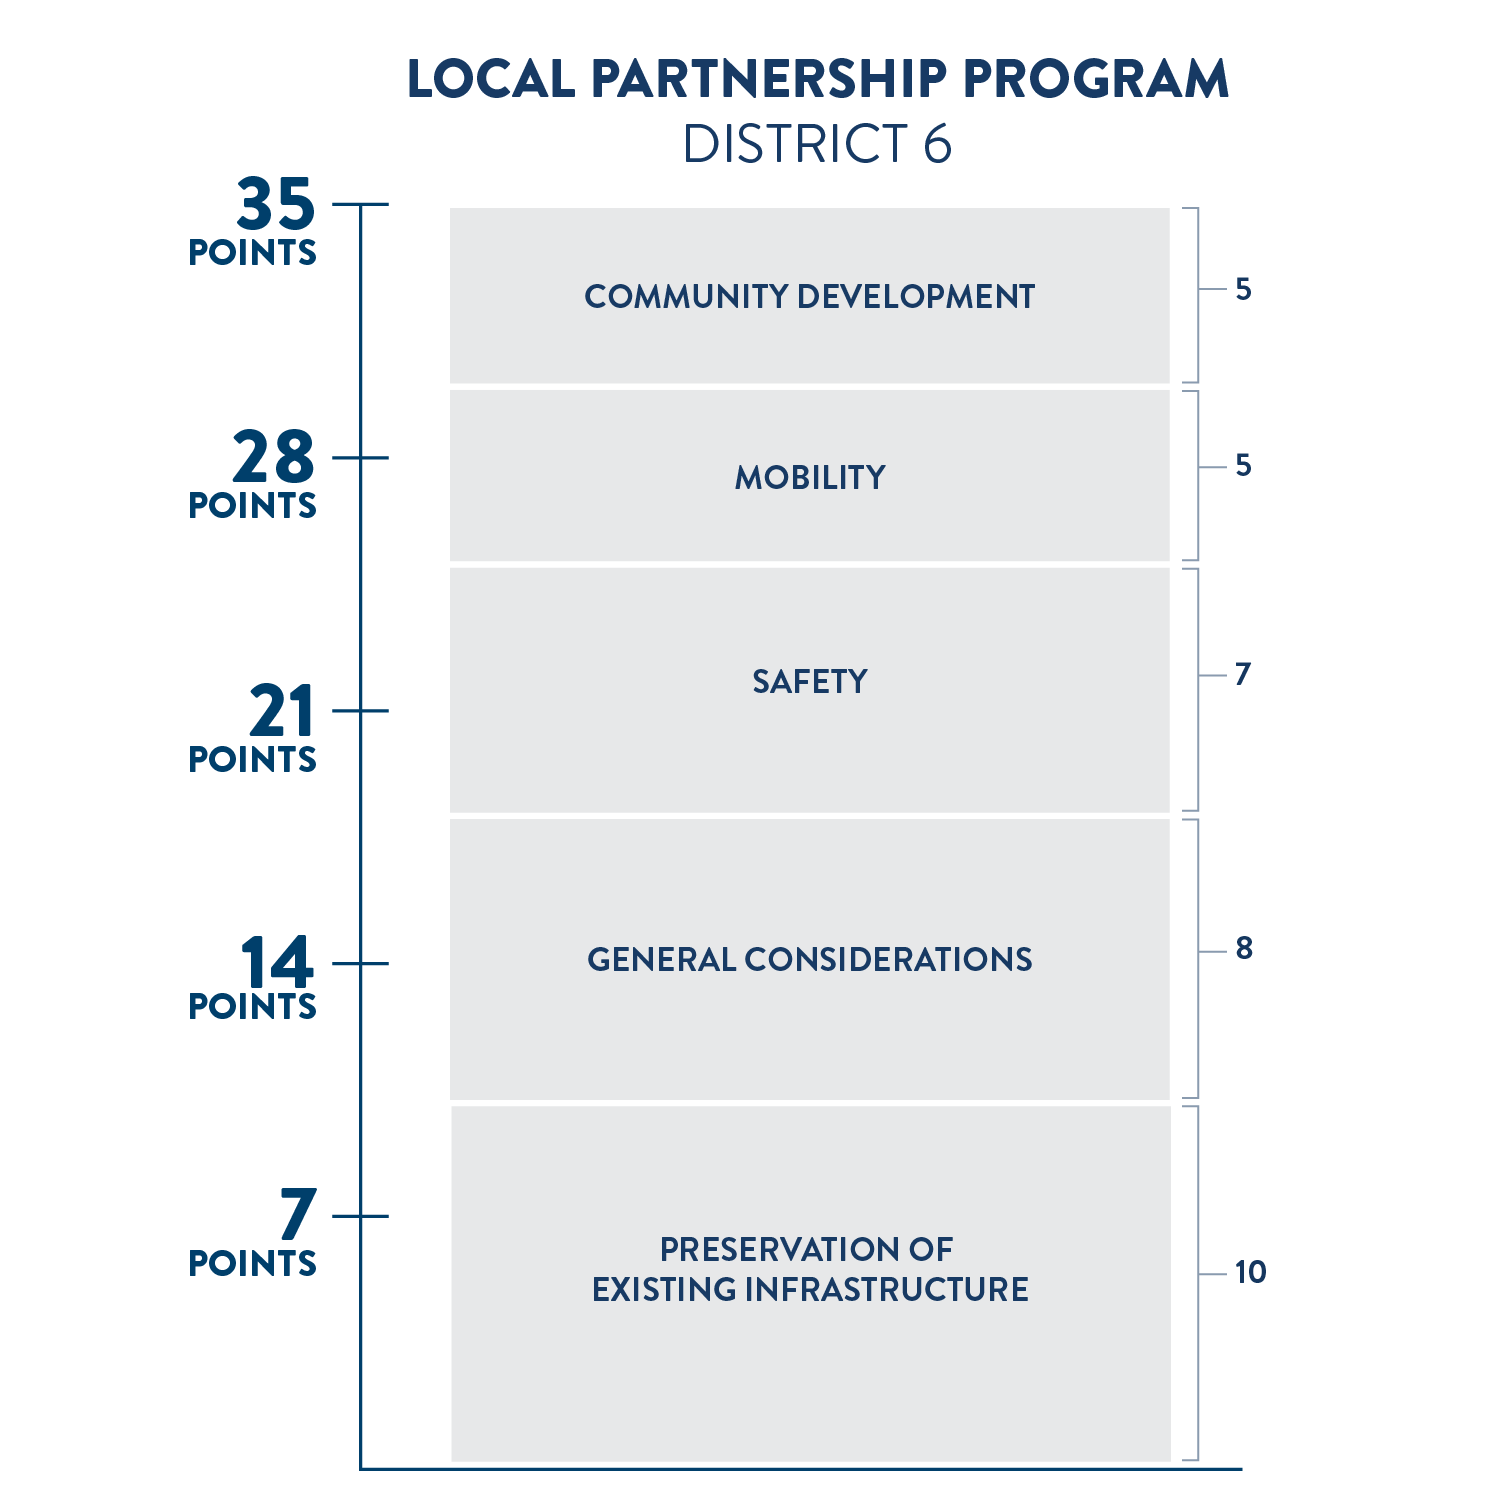 Scoring criteria for the local partnership program in district 6. Out of 35 possible points, 10 points are based on the preservation of existing infrastructure, 8 points are based on general considerations, 7 points are based on safety, 5 points are based on mobility, and 5 points are based on community development.